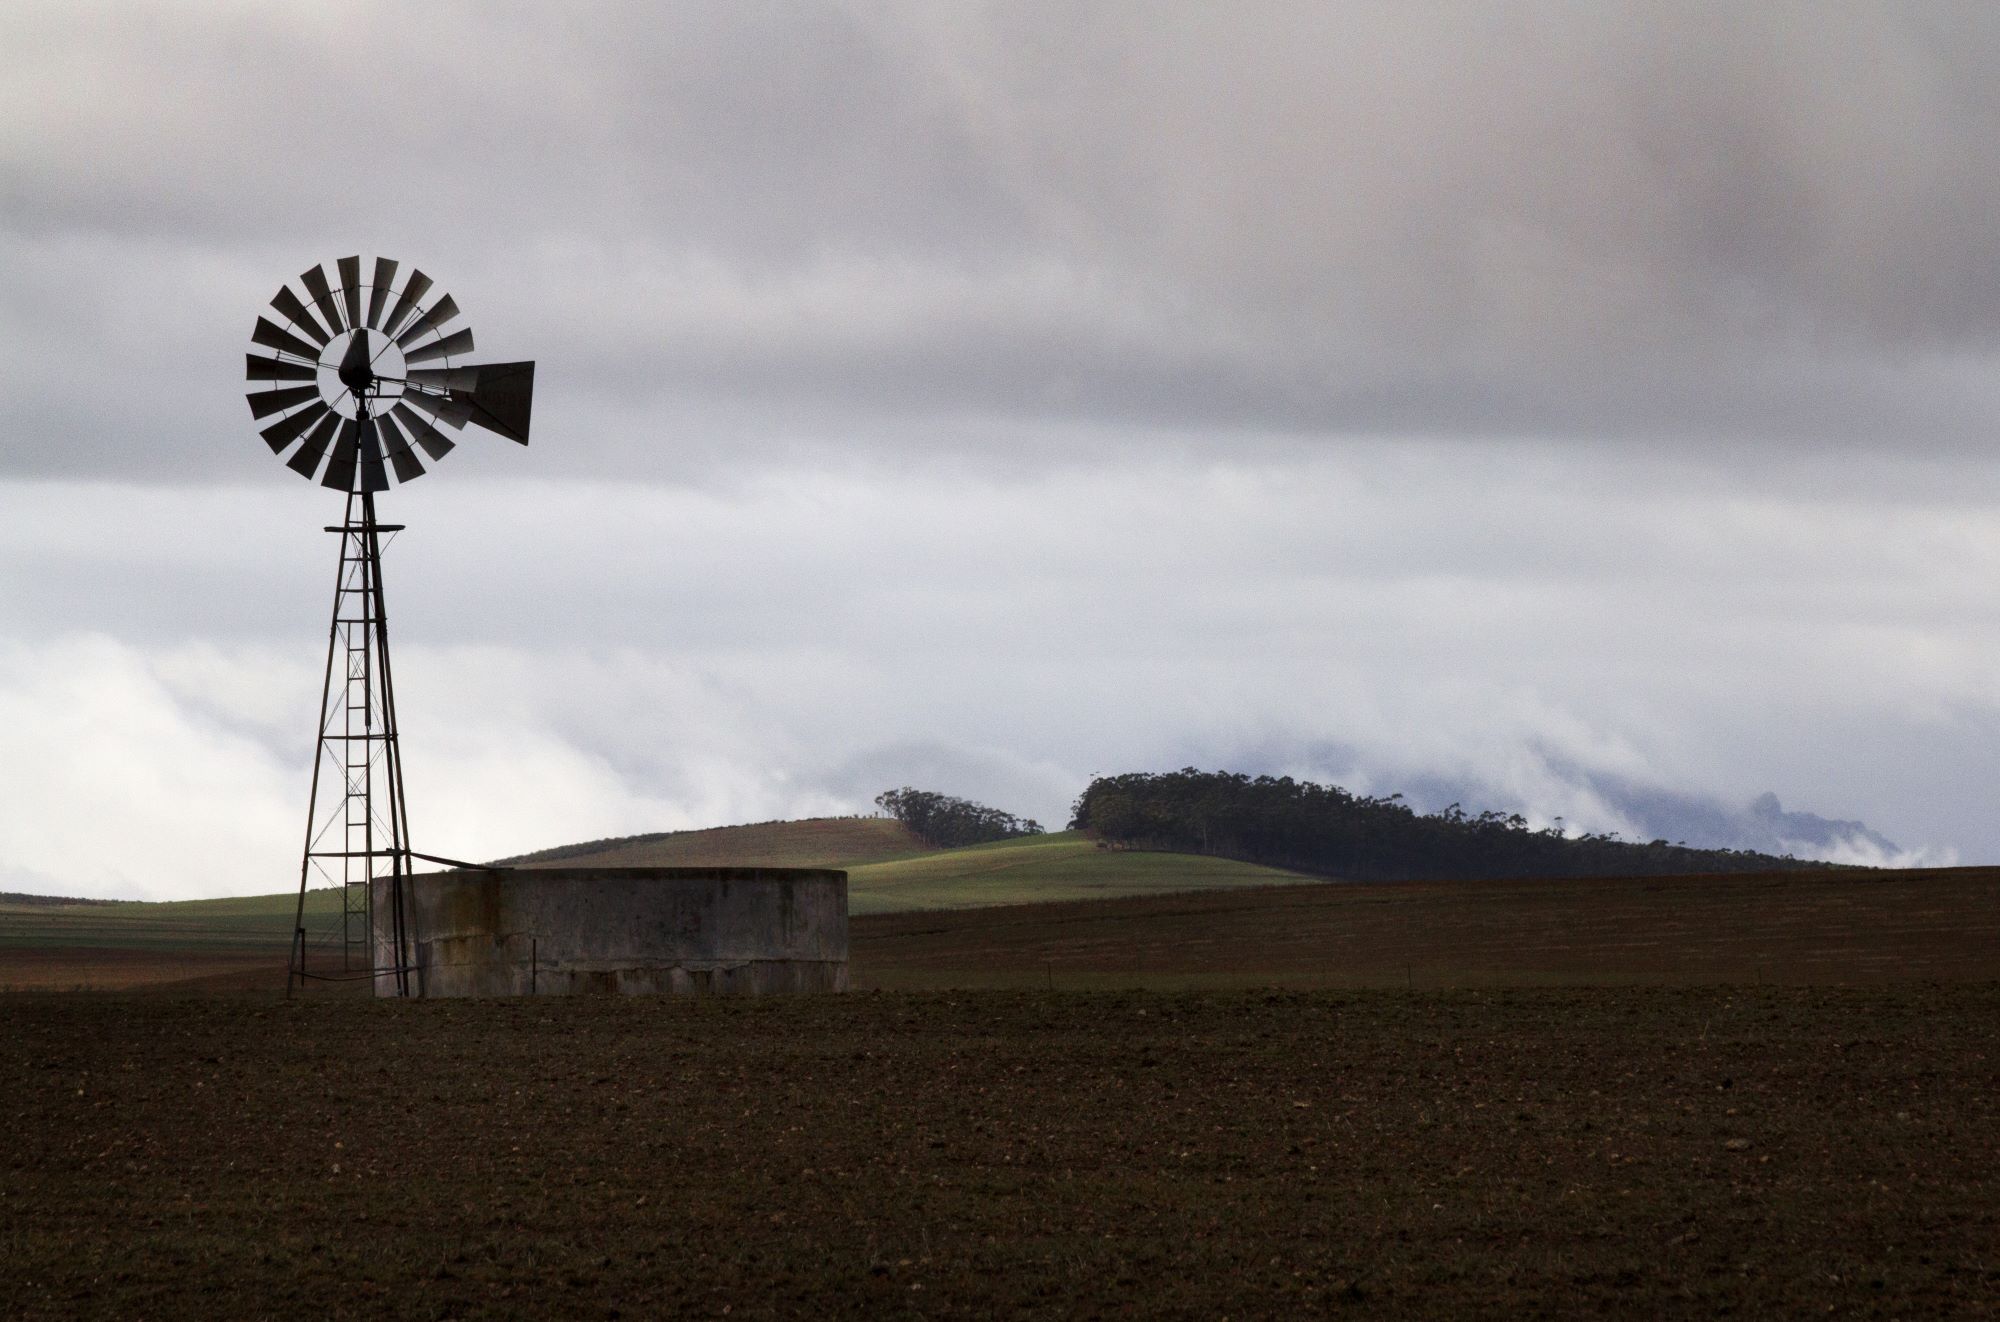 A beautiful shot of an agricultural field with a windmill.